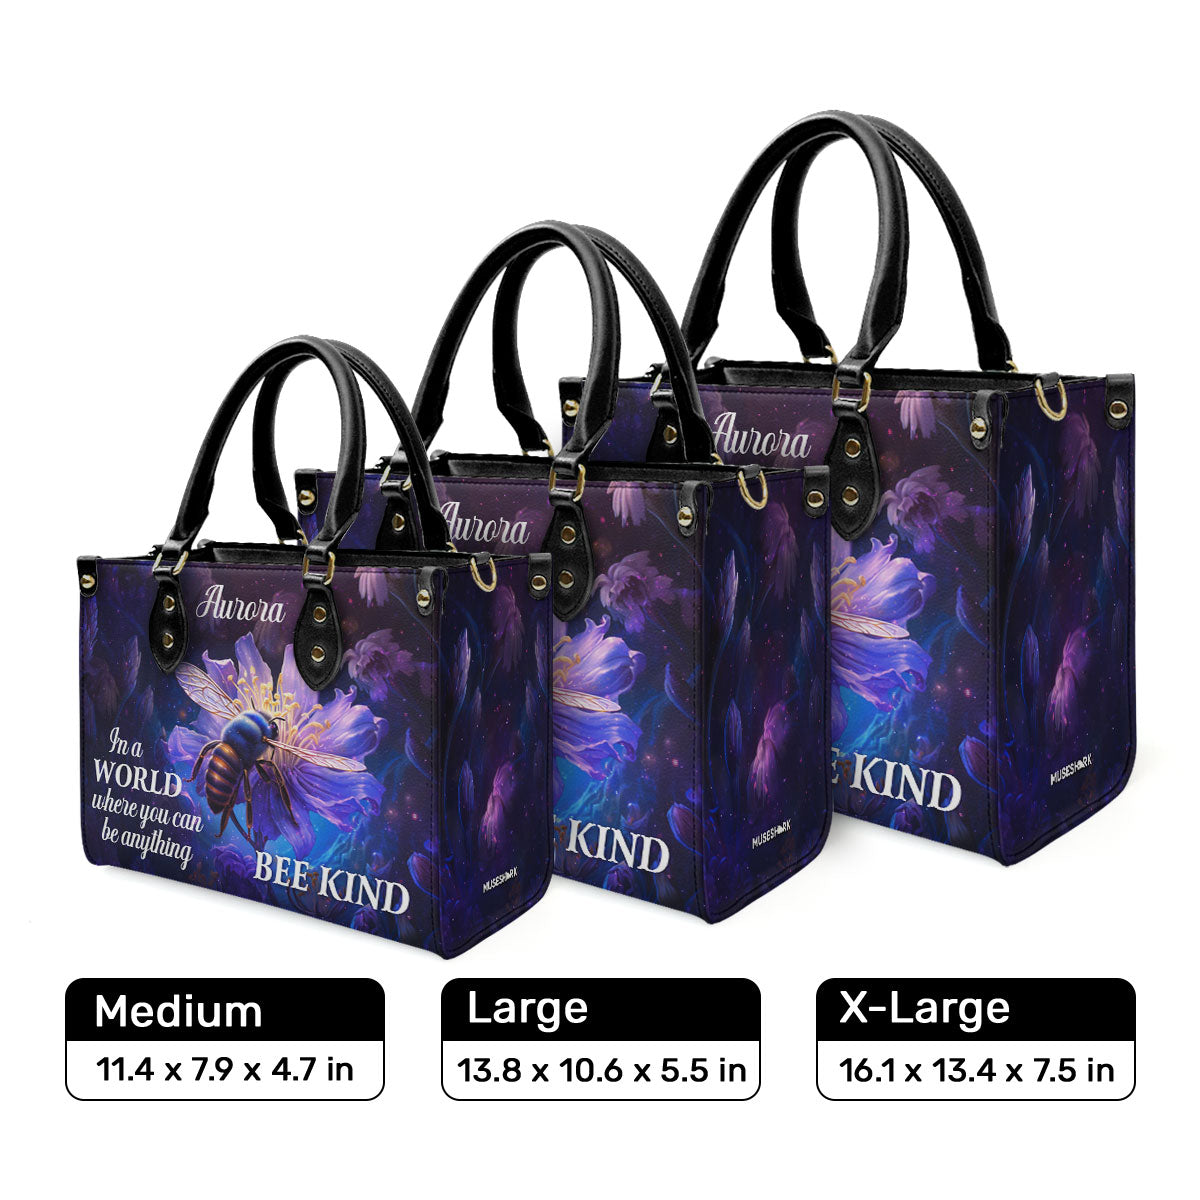 Bee Kind - Personalized Leather Handbag MS-NH30A